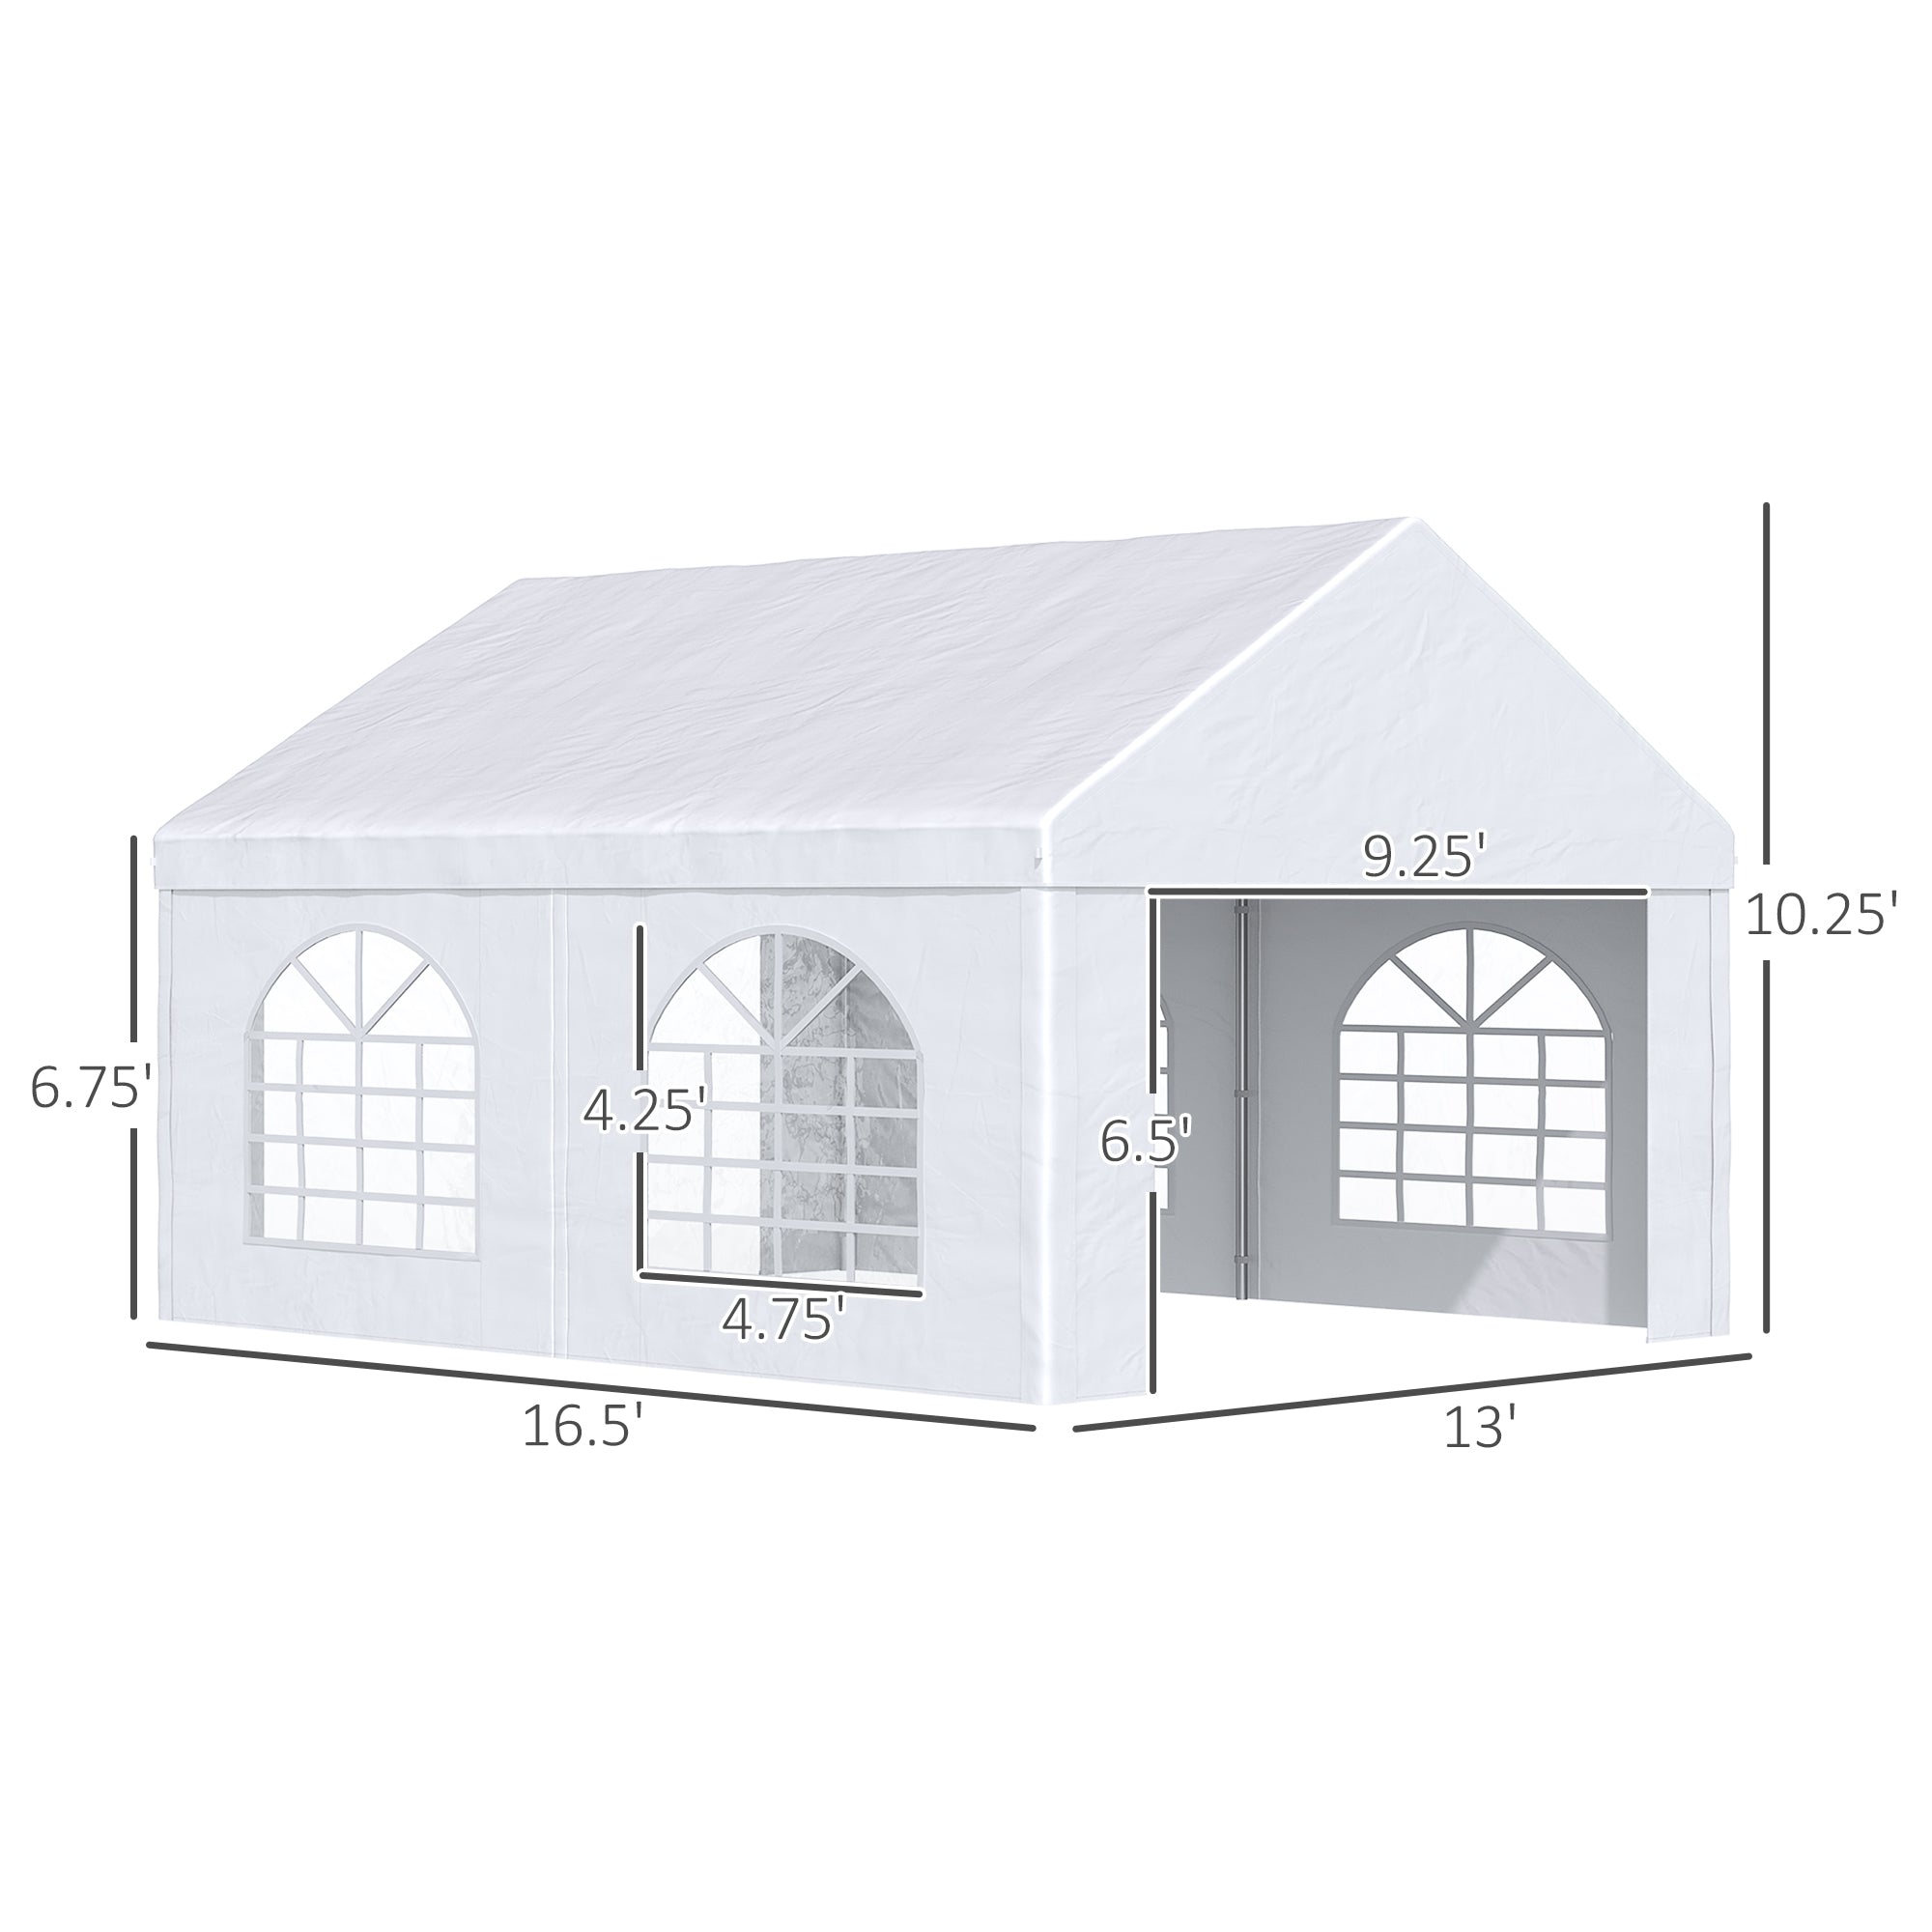 Outsunny 13' x 16' Party Tent Carport with Removable Sidewalls, Windows and Double Doors, Heavy Duty Canopy Tent Sun Shade Shelter, for Parties, Wedding, Outdoor Events, BBQ